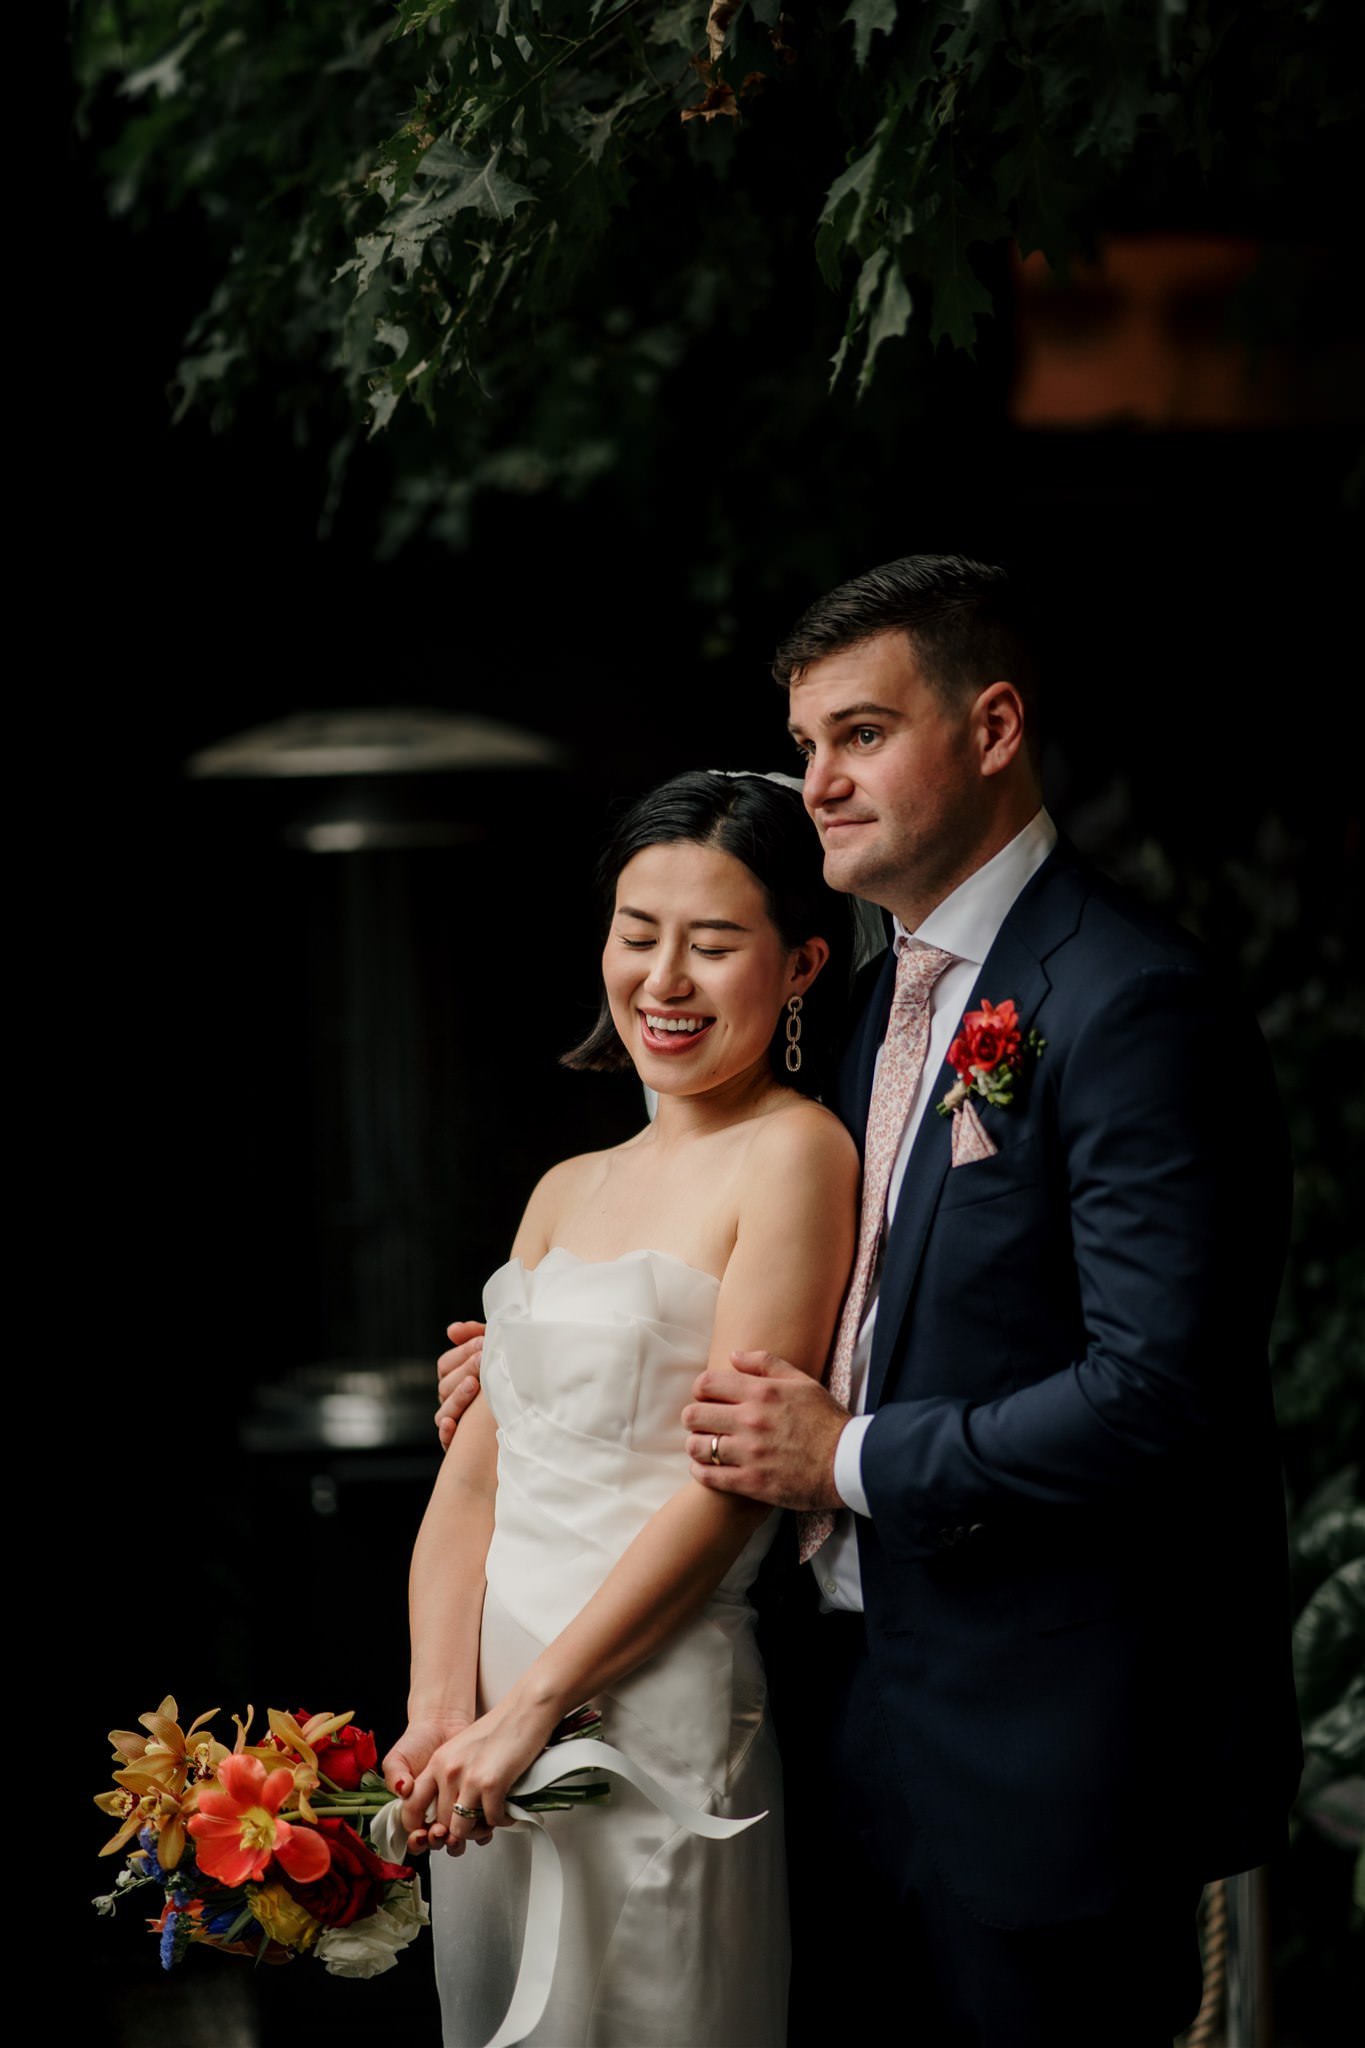 glasshouse-morningside-urban-best-auckland-wedding-venue-central-indoor-photographer-videographer-dear-white-productions-top-industrial-chinese-ceremony-tradition (92).jpg